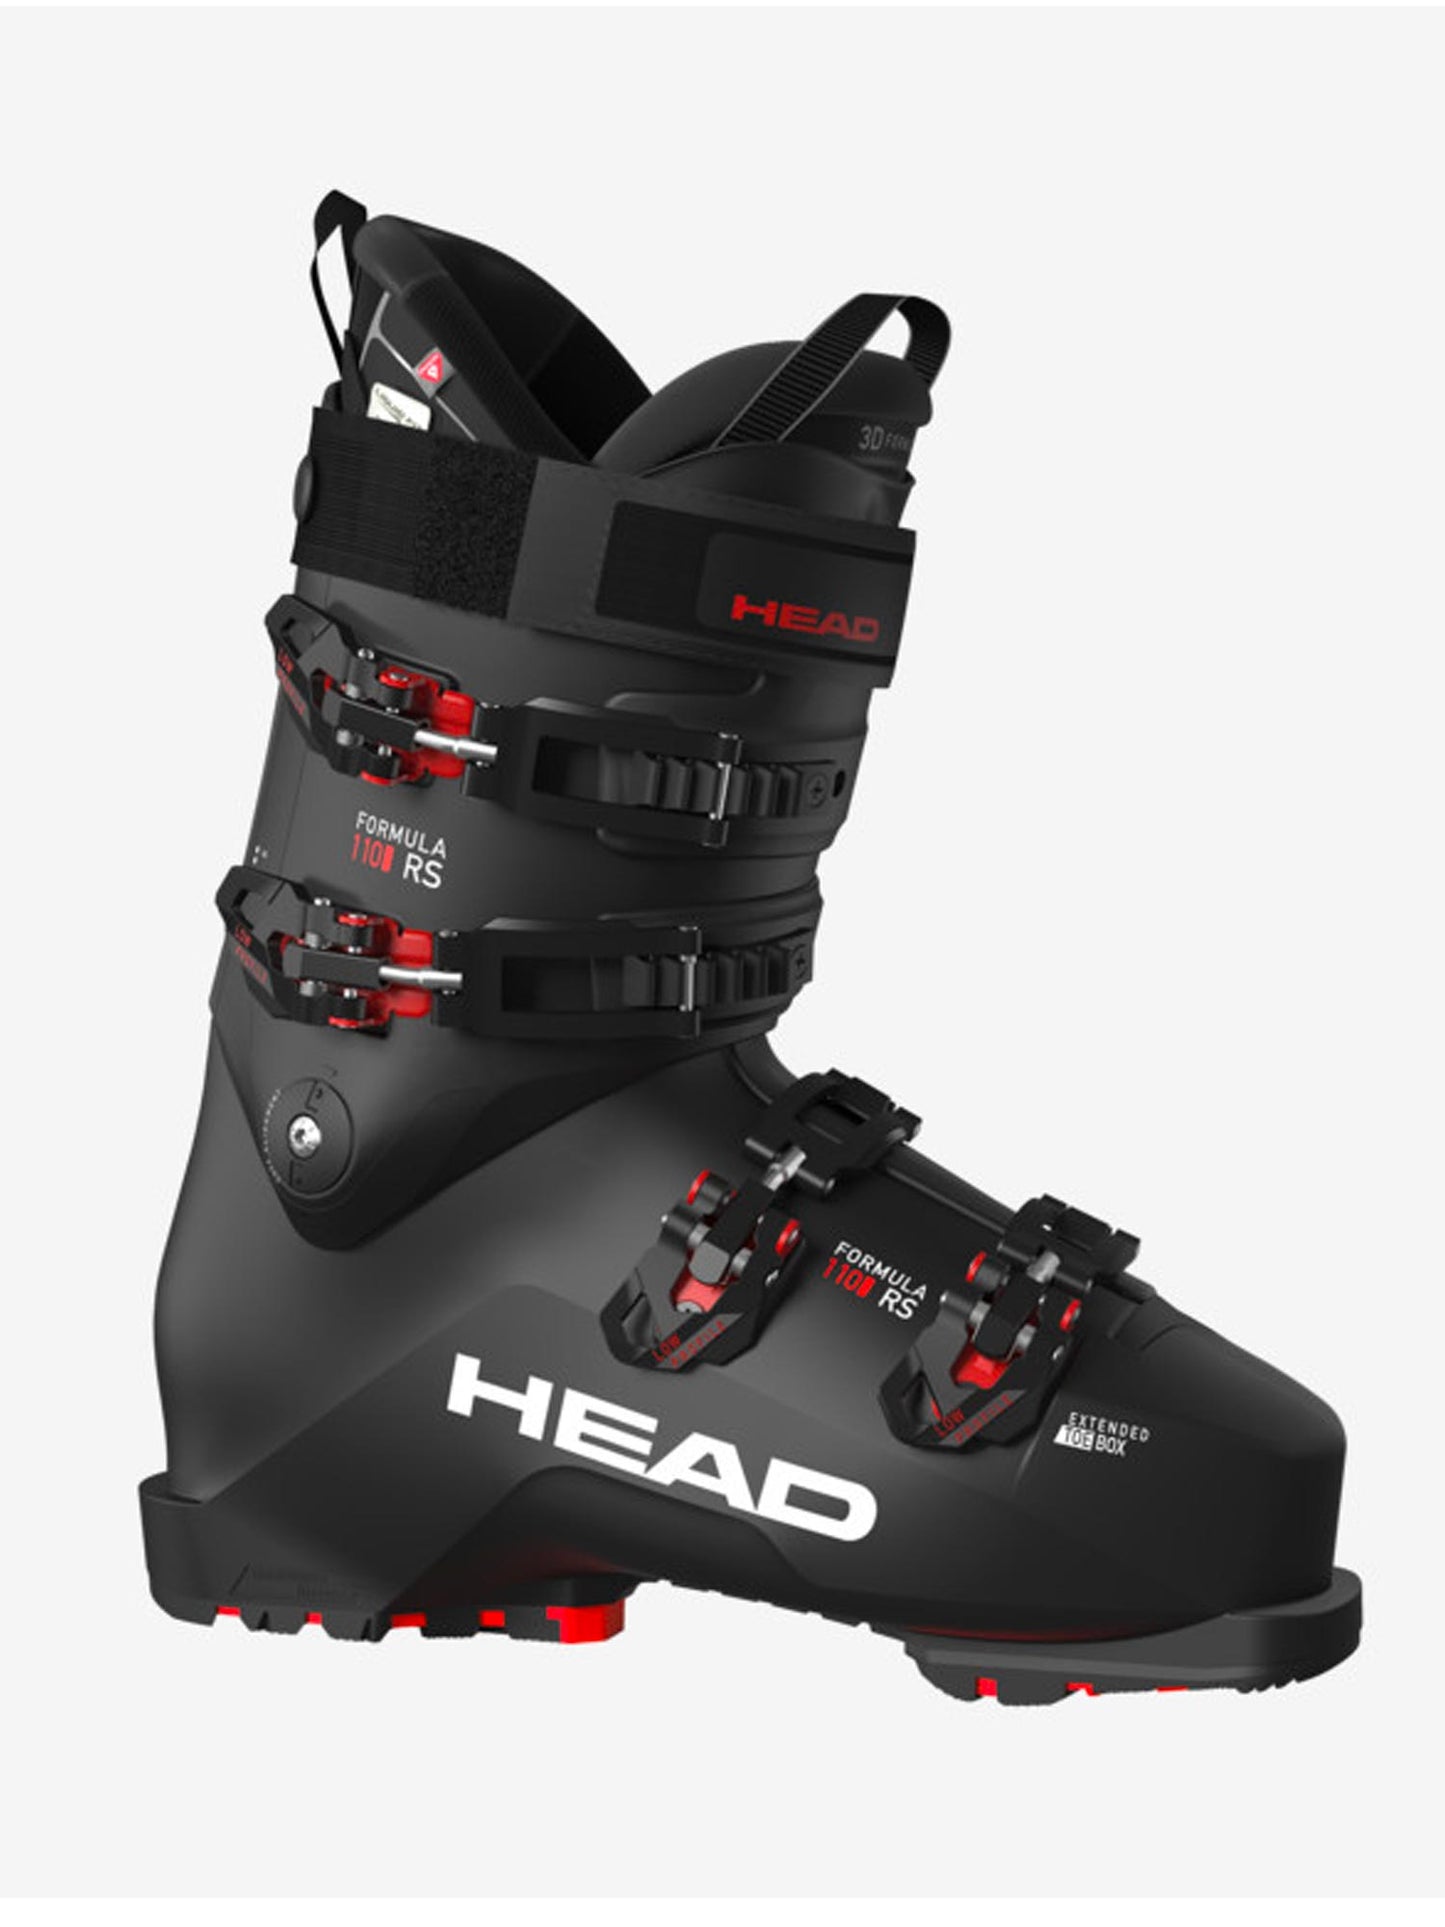 men's Head Formula RS 110 ski boots, black with red accents